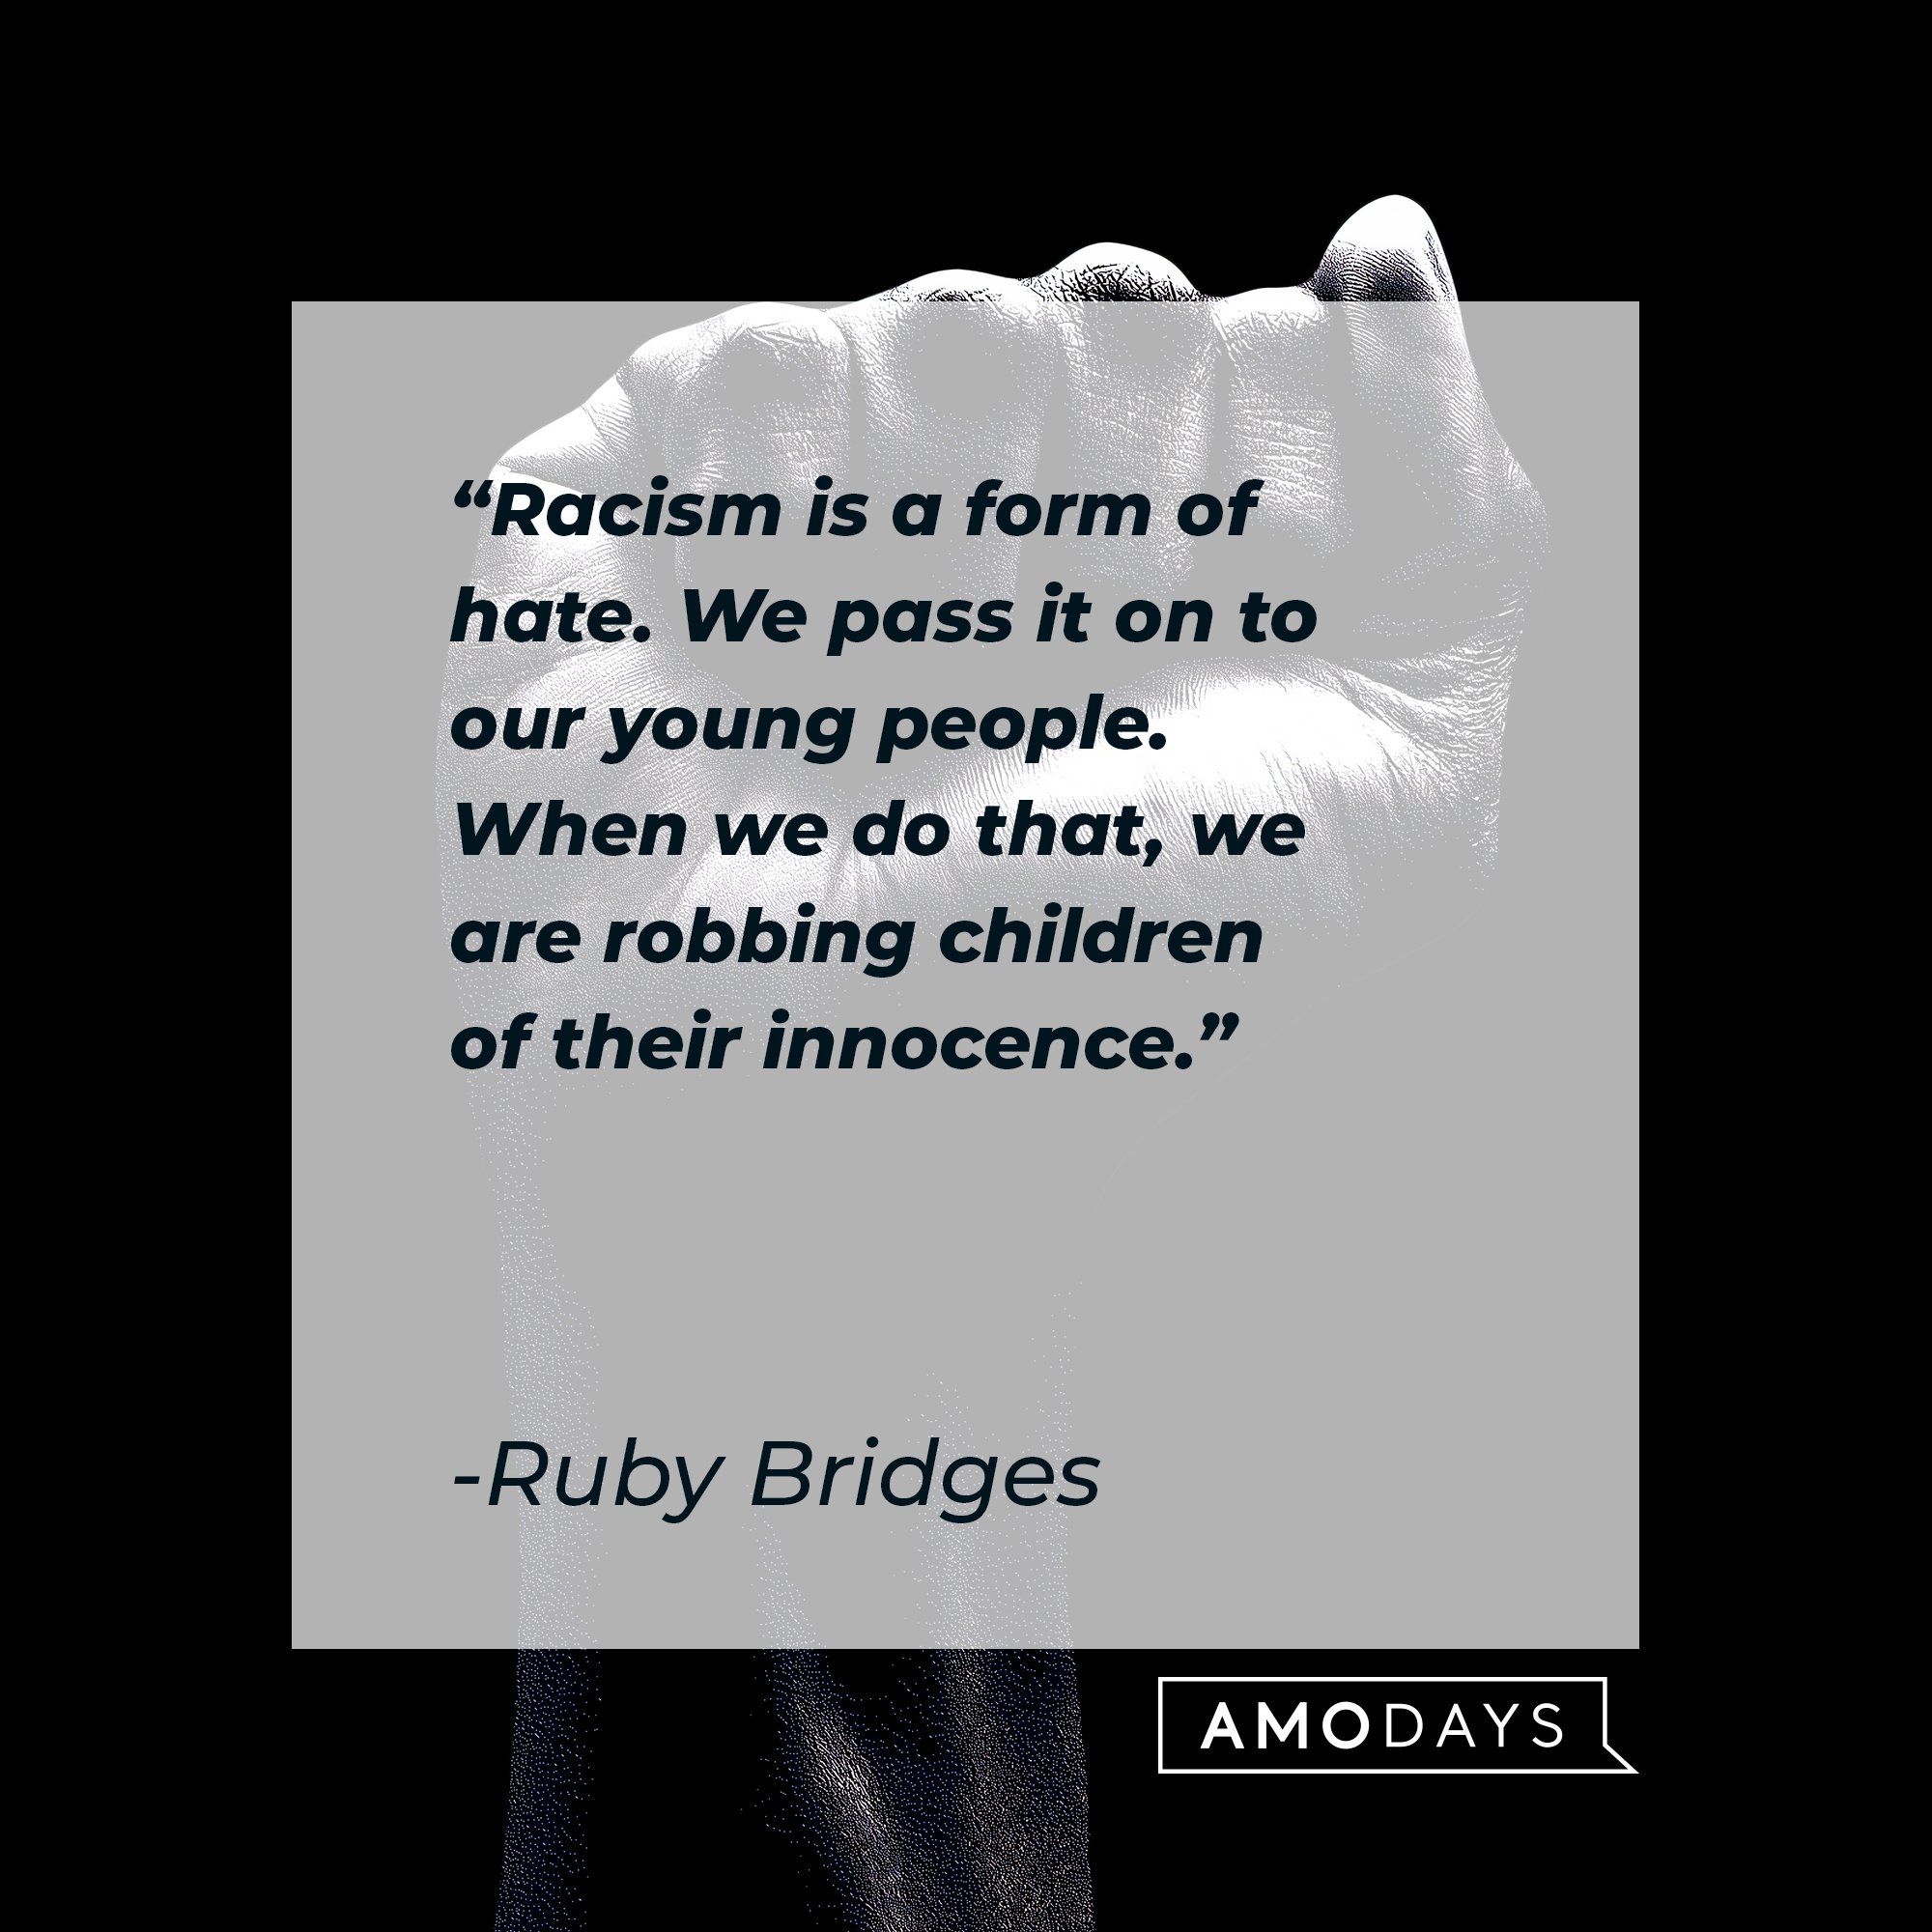 Ruby Bridges’ quote: "Racism is a form of hate. We pass it on to our young people. When we do that, we are robbing children of their innocence." | Image: AmoDays 